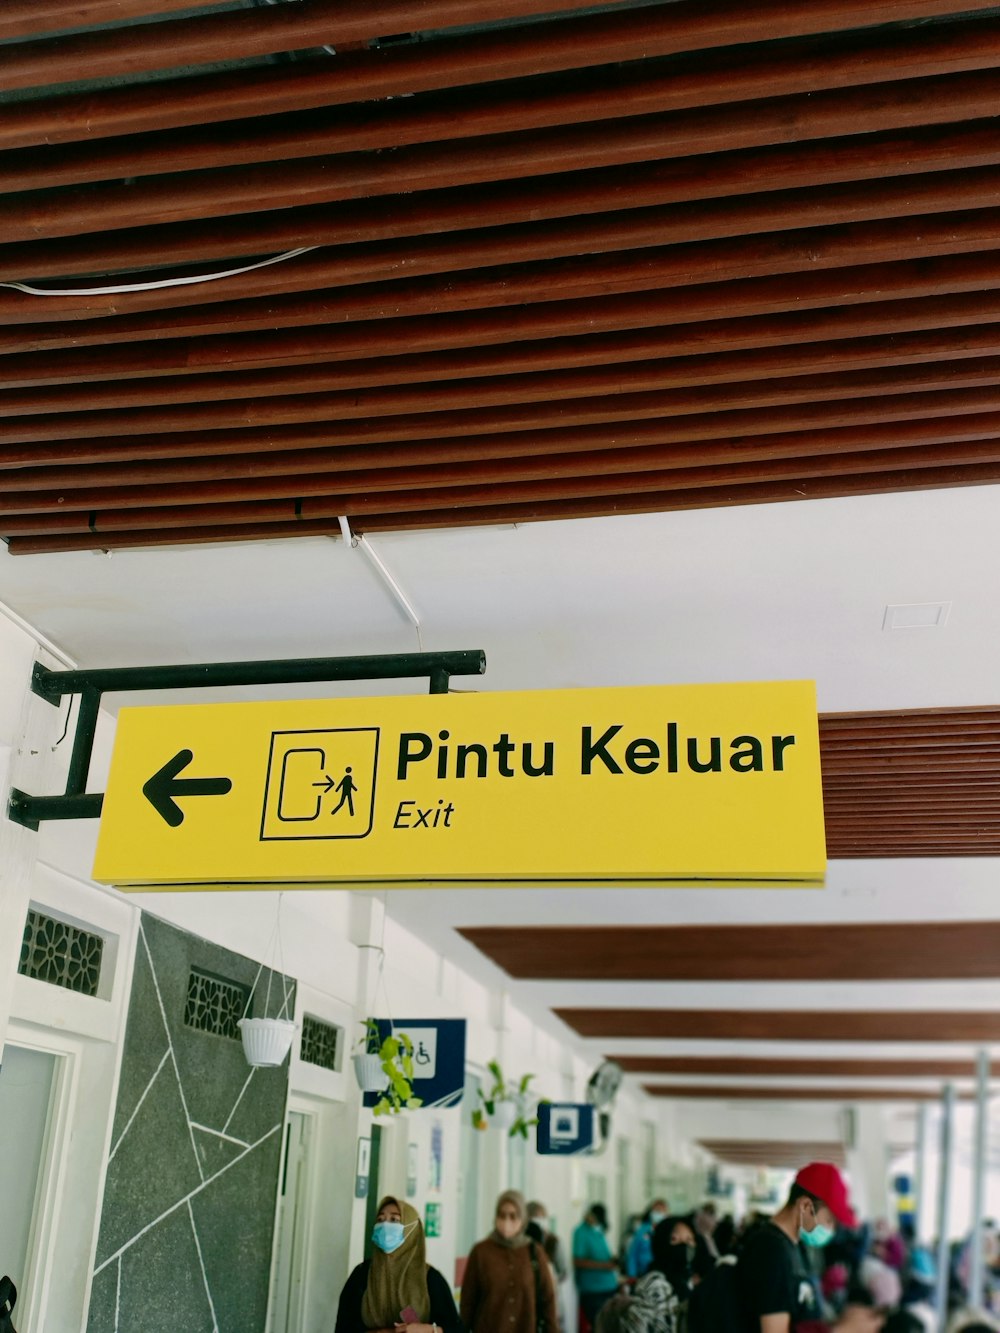 a yellow sign hanging from the ceiling of a building